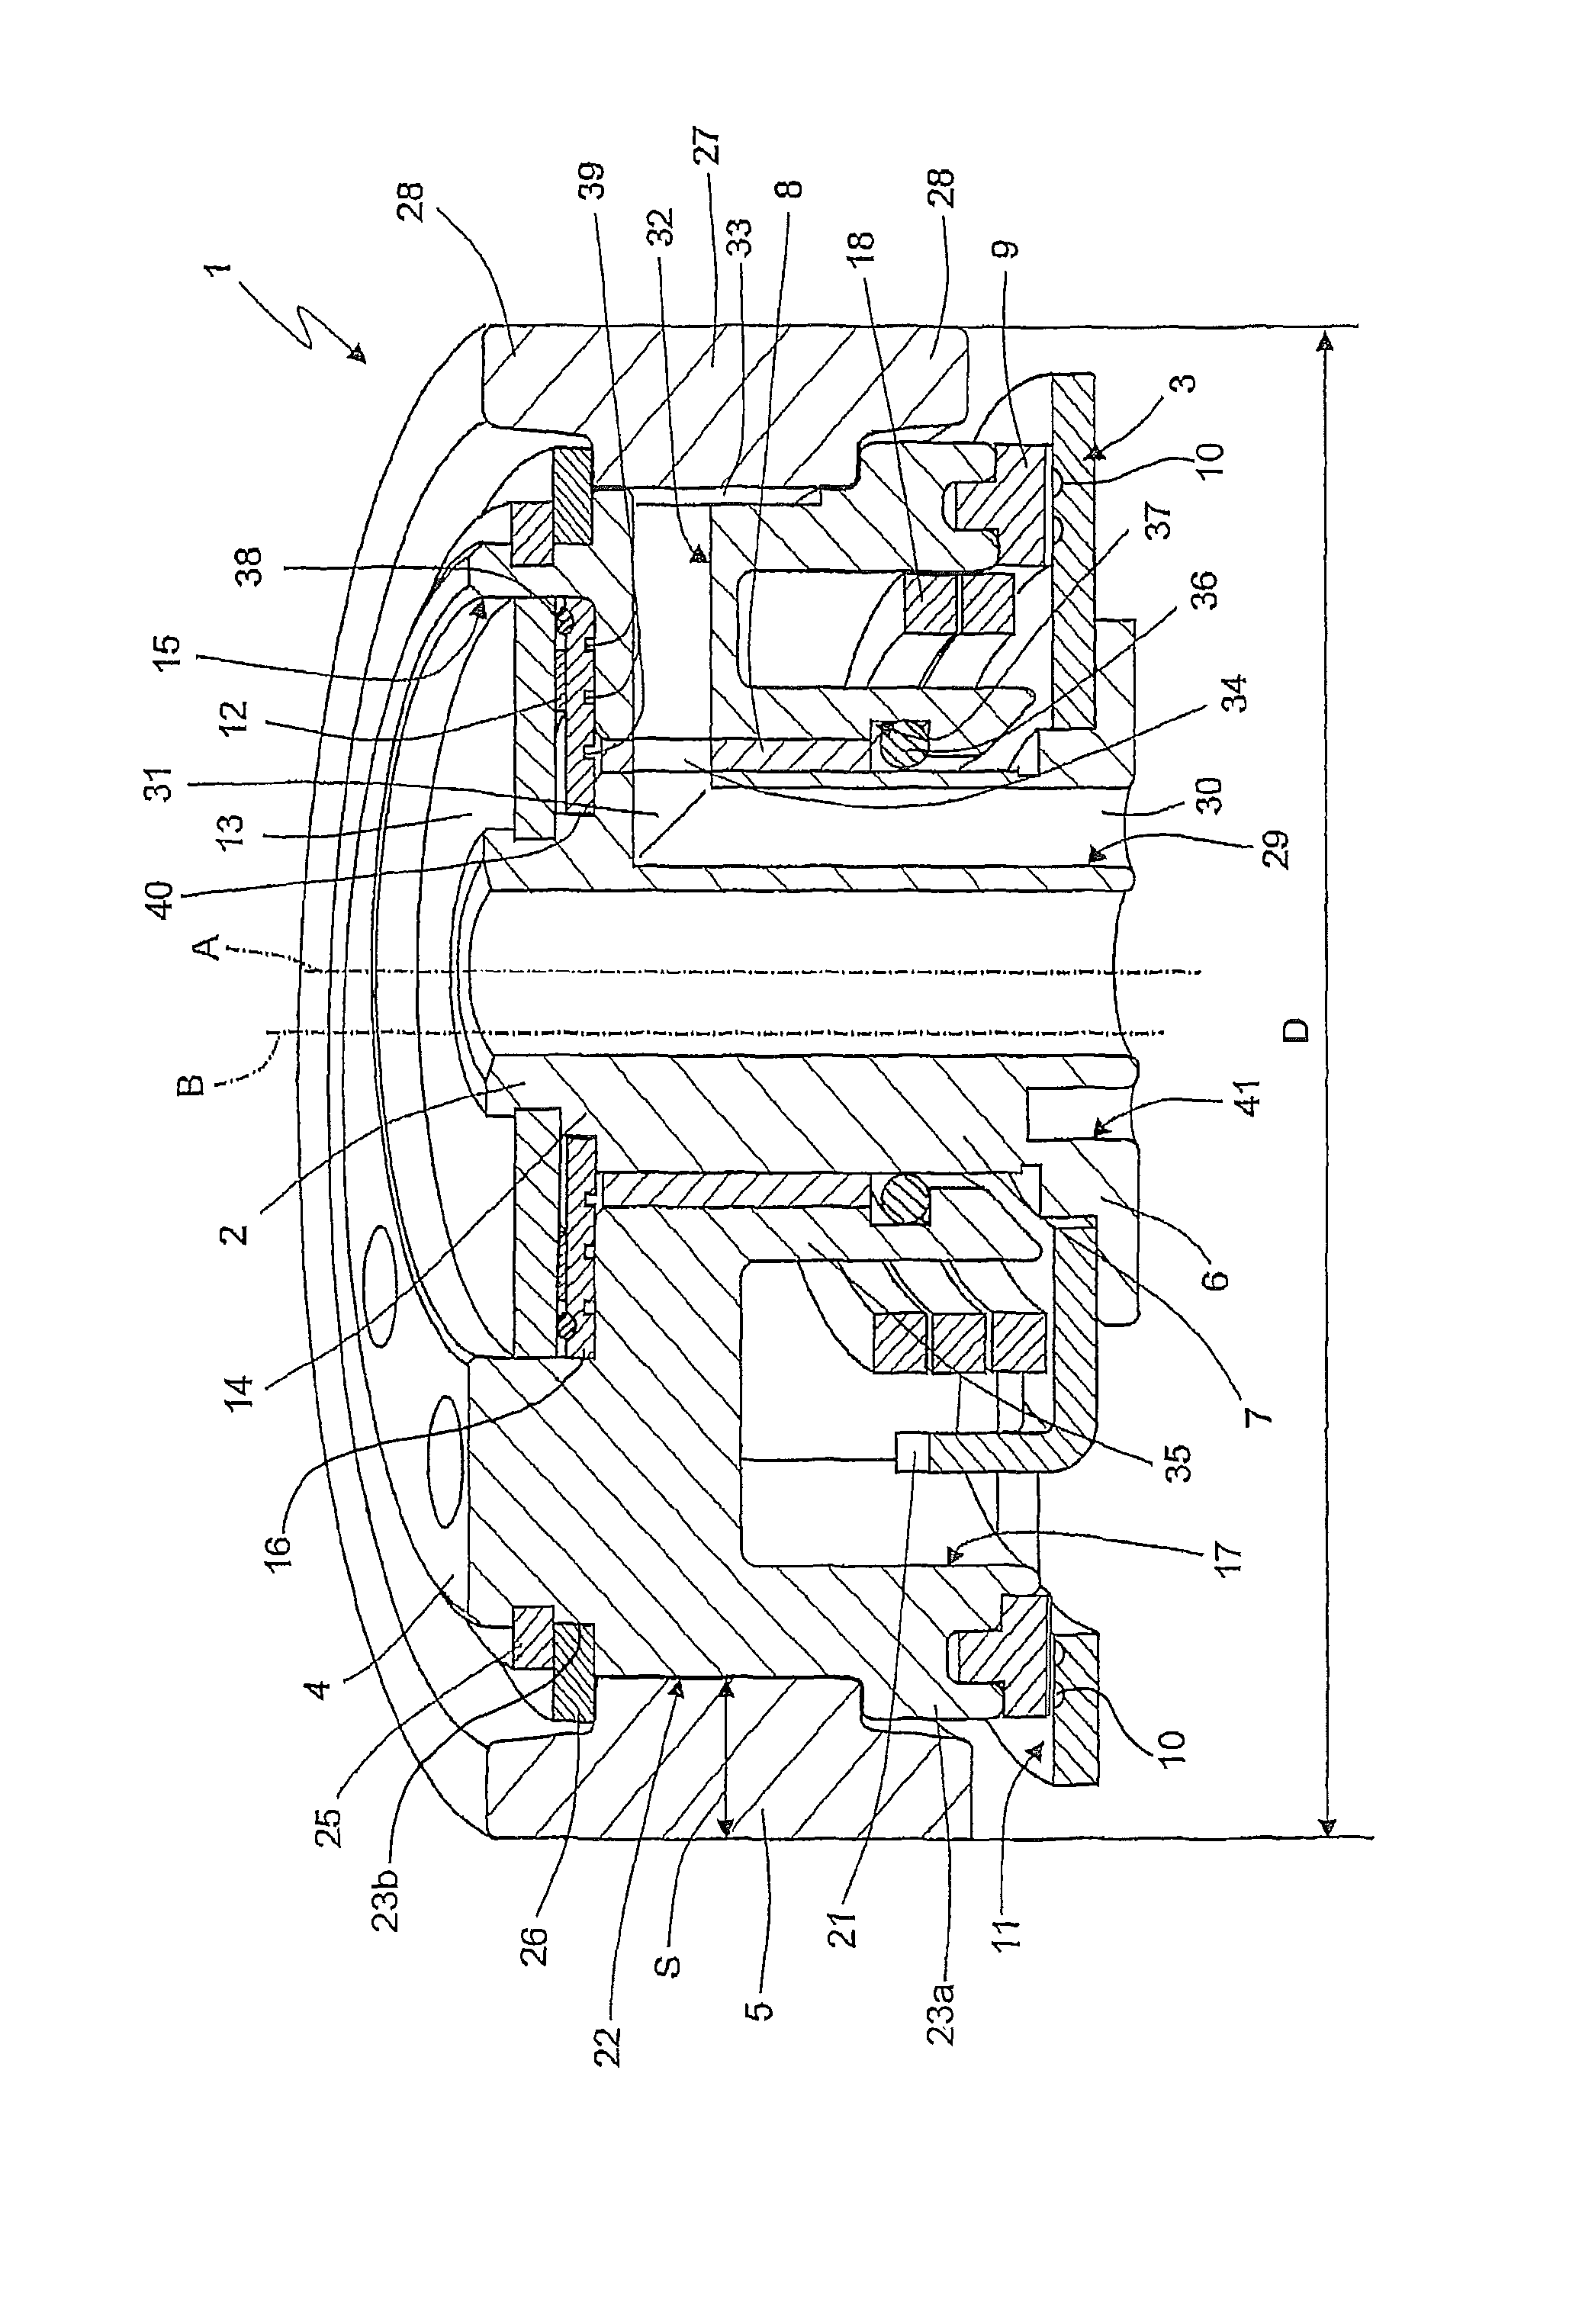 Pulley tensioner for an oil wet belt drive